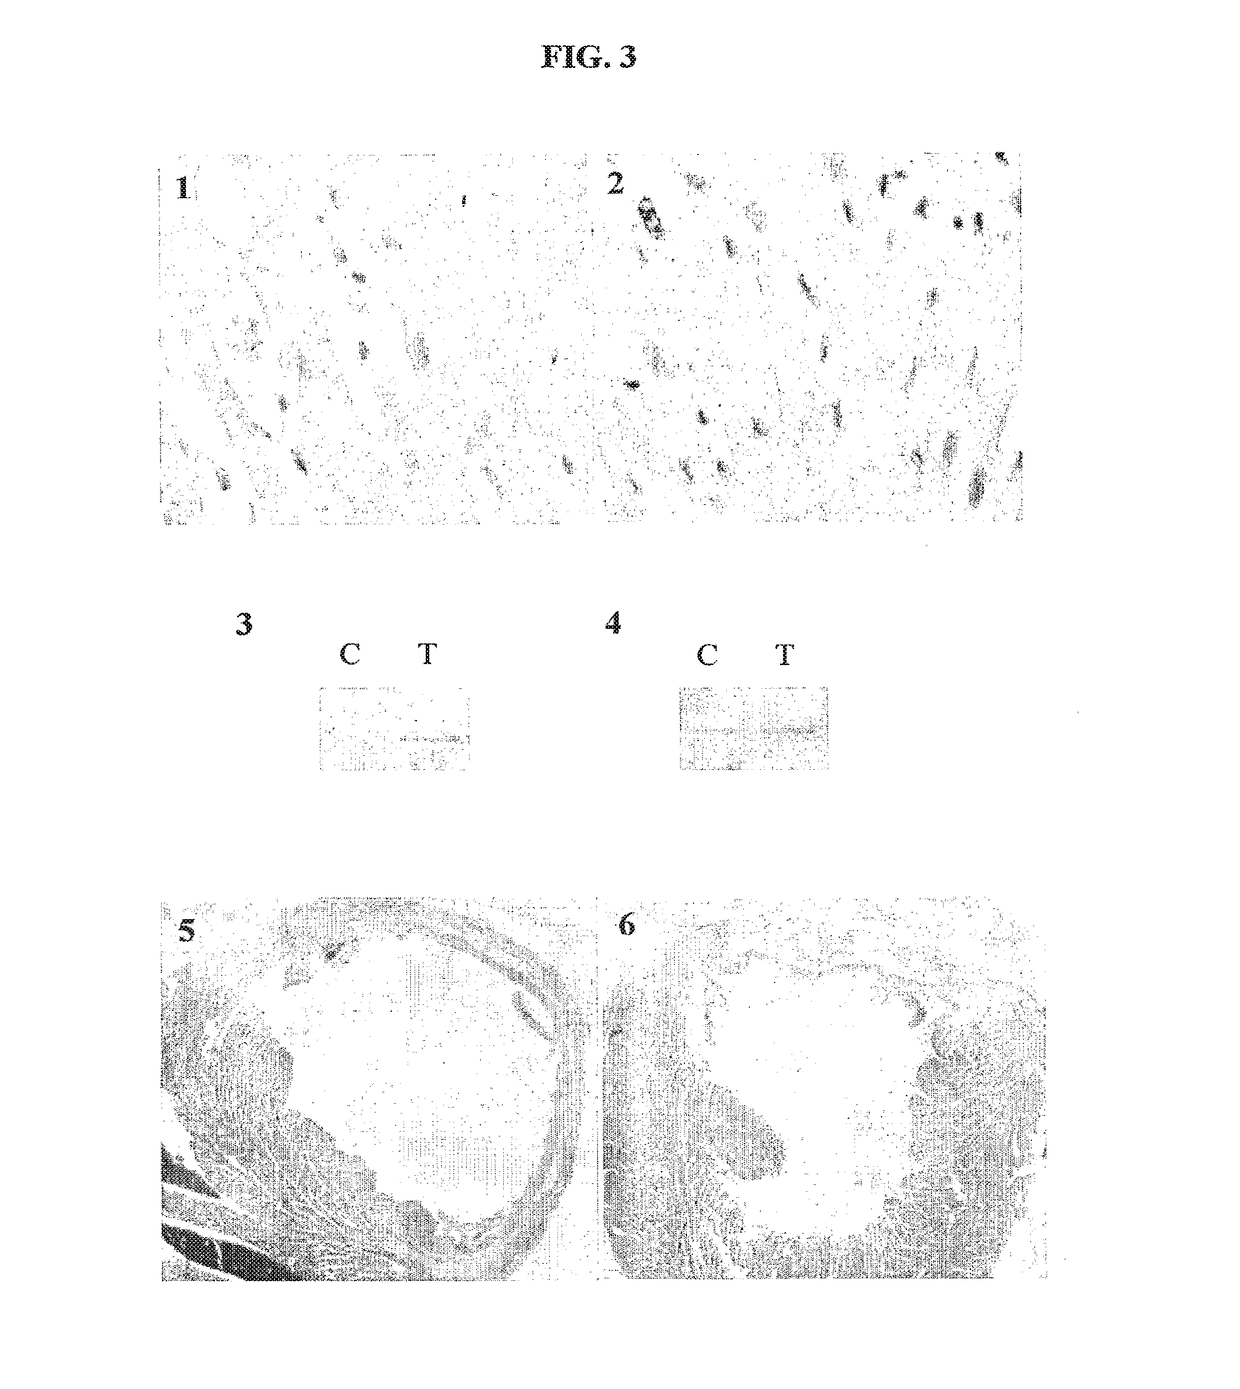 Pharmaceutical Composition and Method for Neoangiogenesis/Revascularization Useful in Treating Ischemic Heart Disease